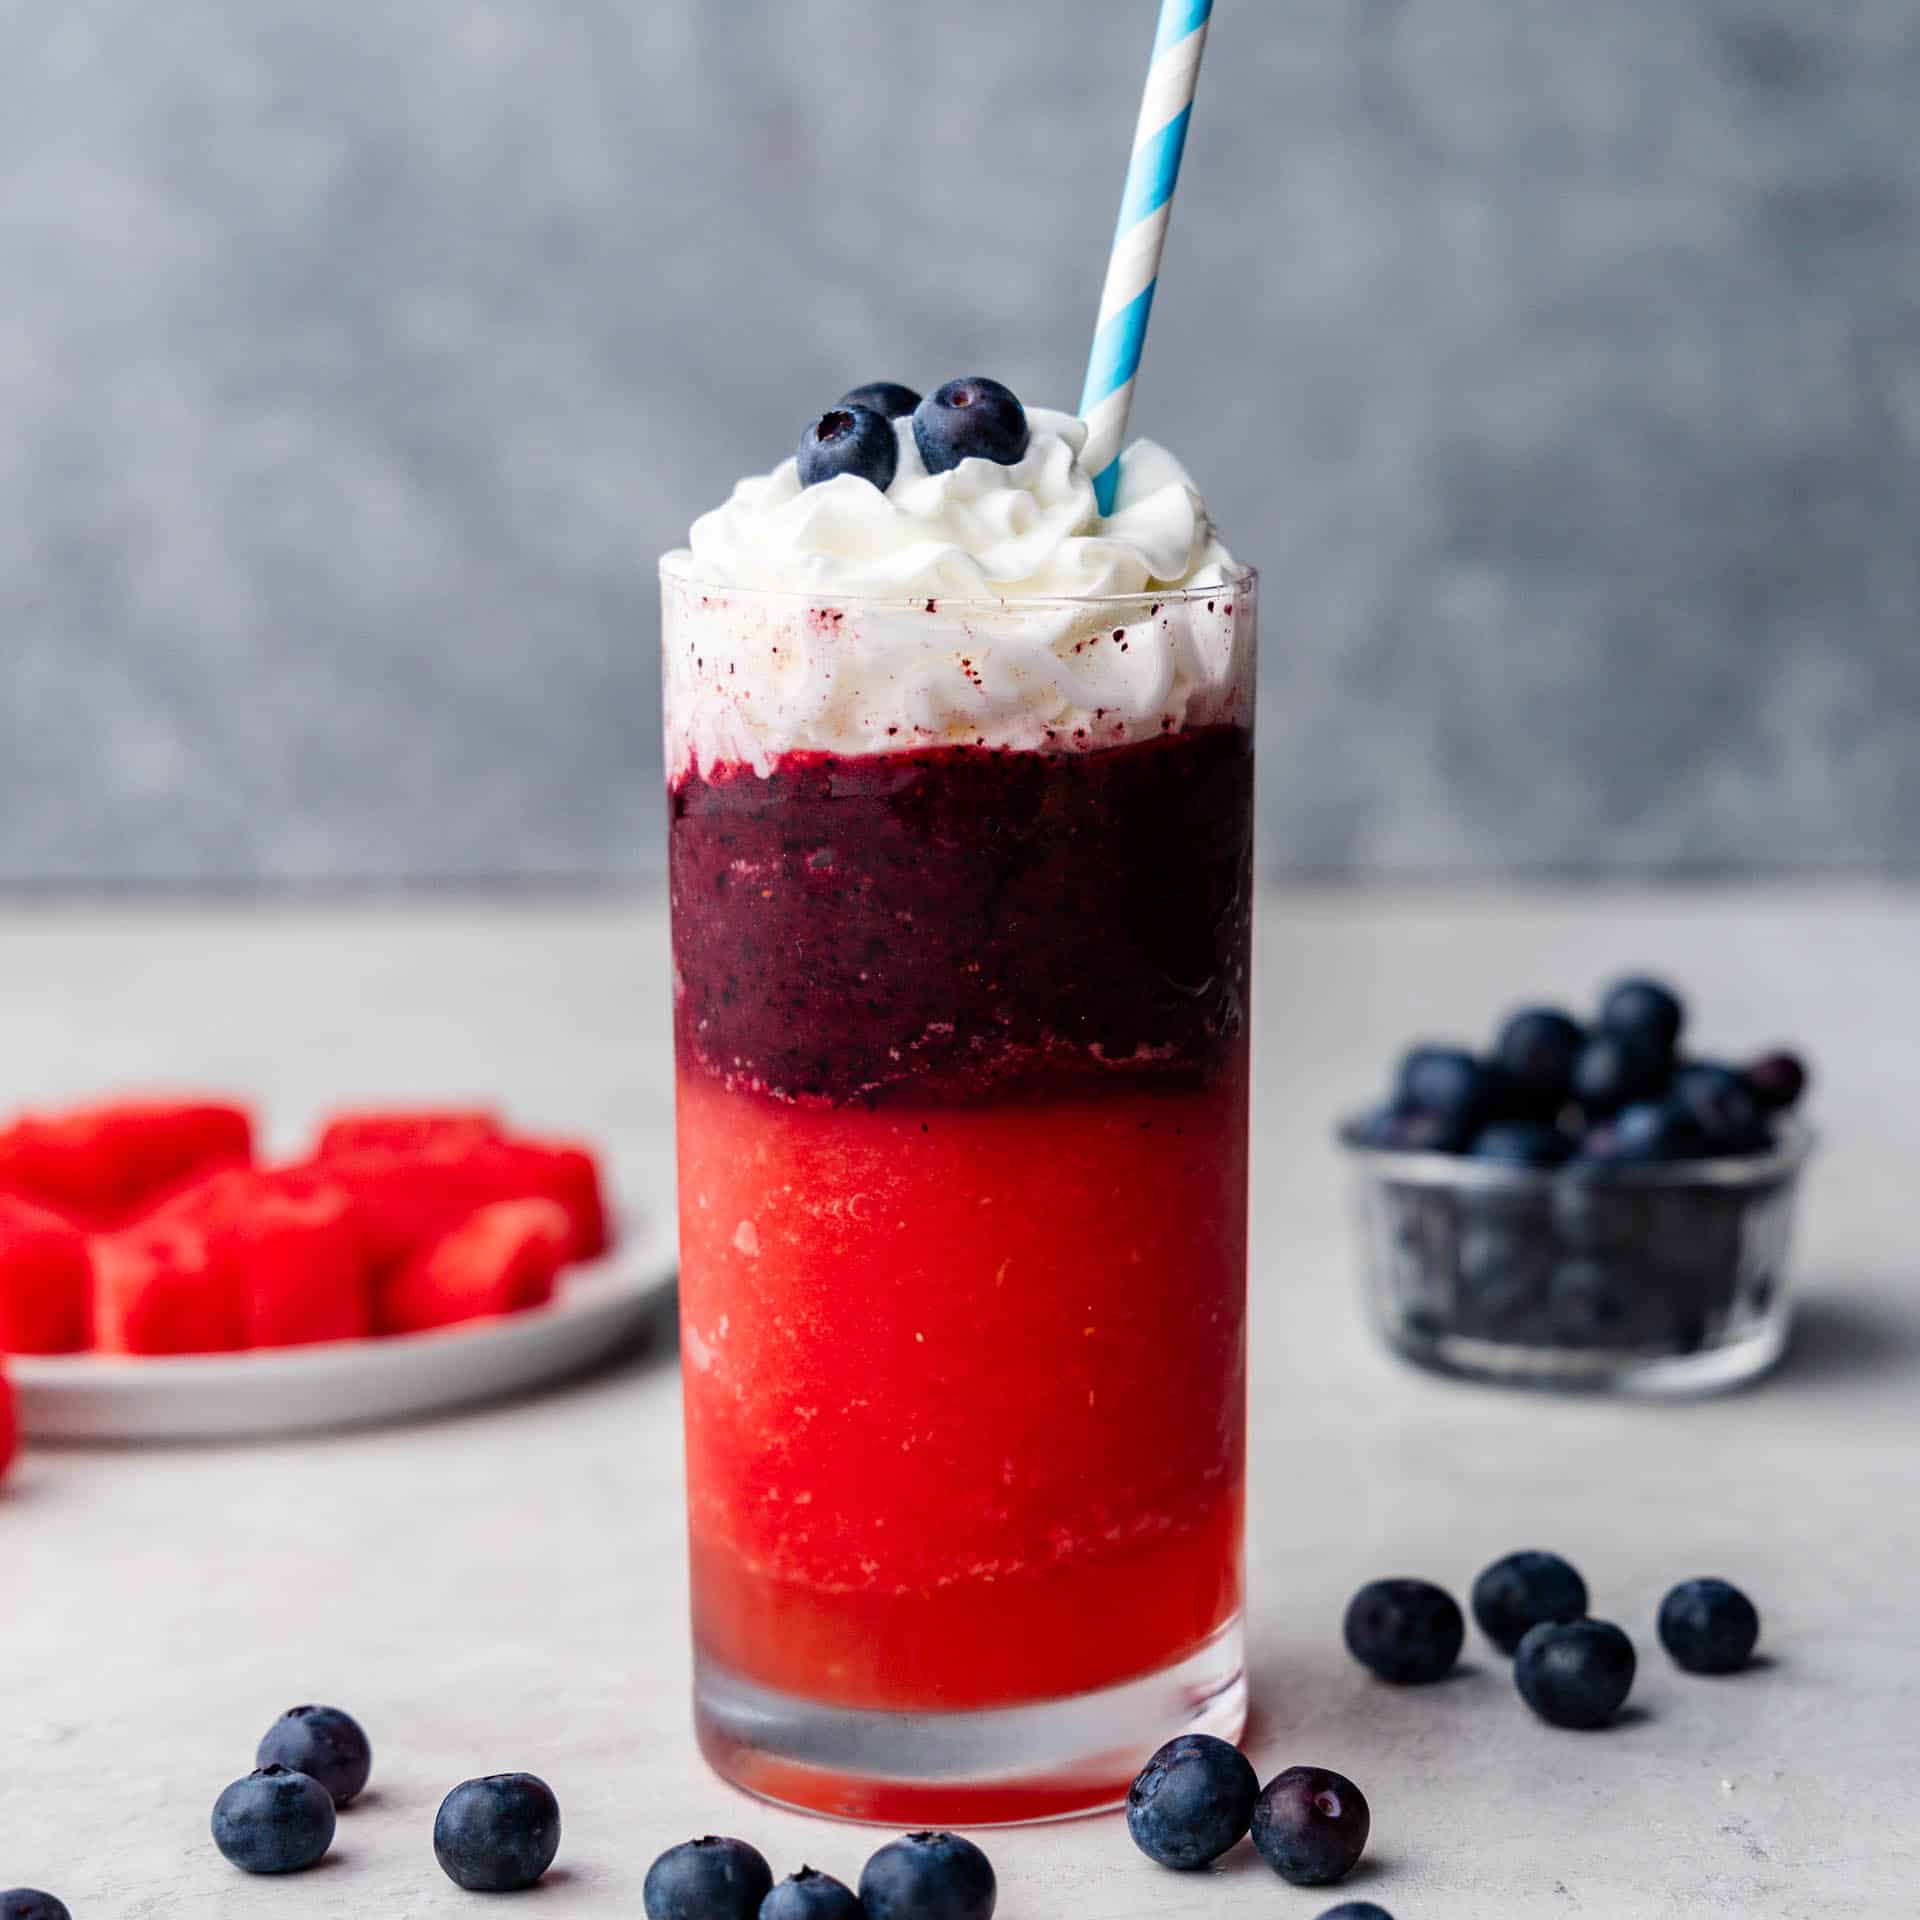 A Red, White, and Blue Slushy with watermelon and blueberries.